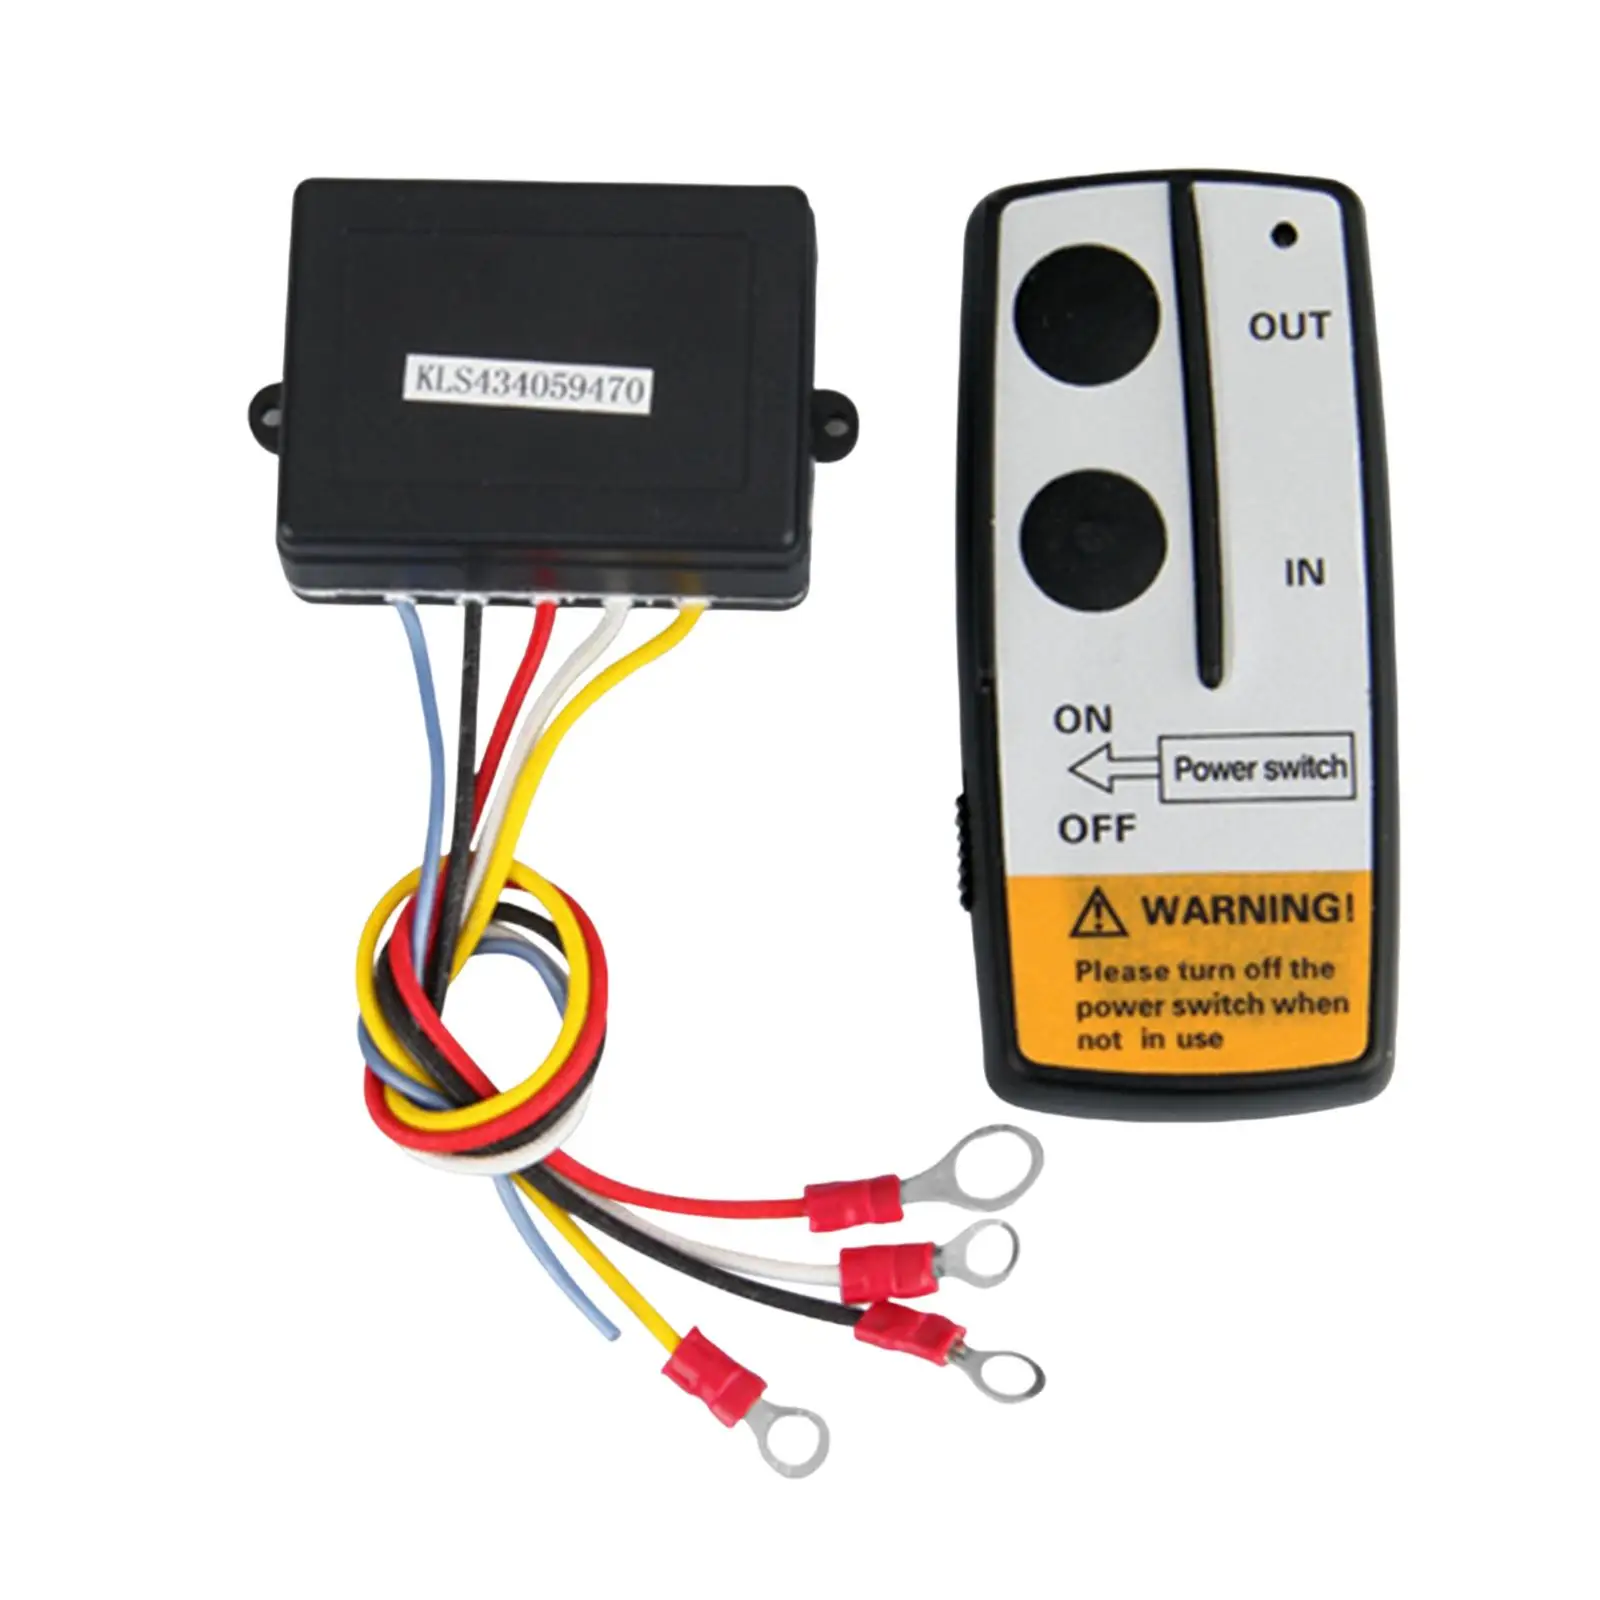 Winch Controller Wireless Handset Switch Controller for Car SUV Truck